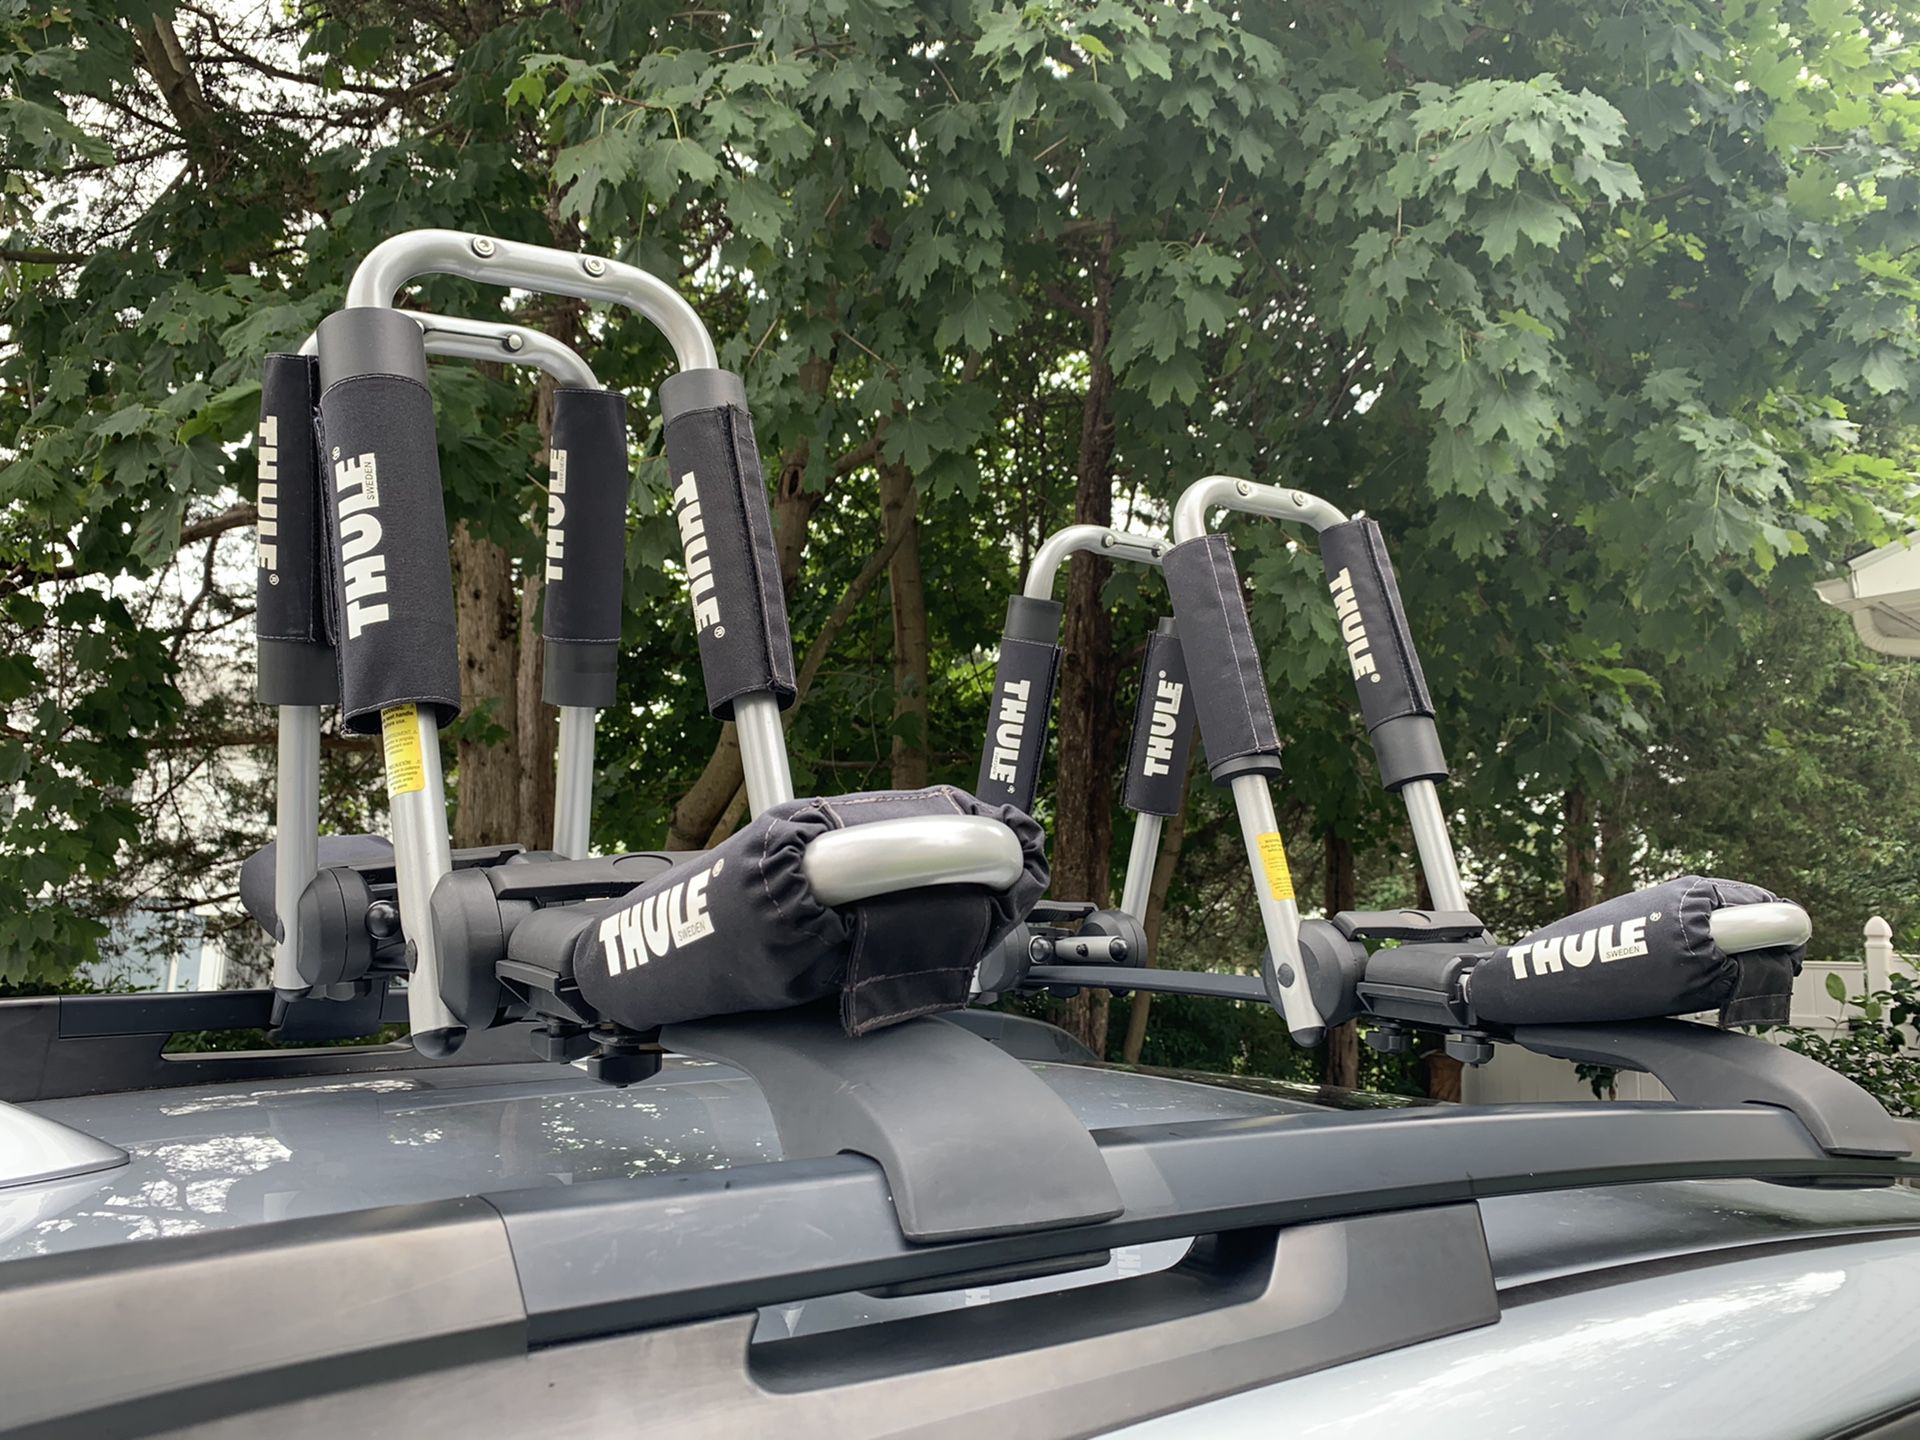 Thule Hull-A-Port Pro Kayak Car Carrier (model 835Pro) - 2 Pairs